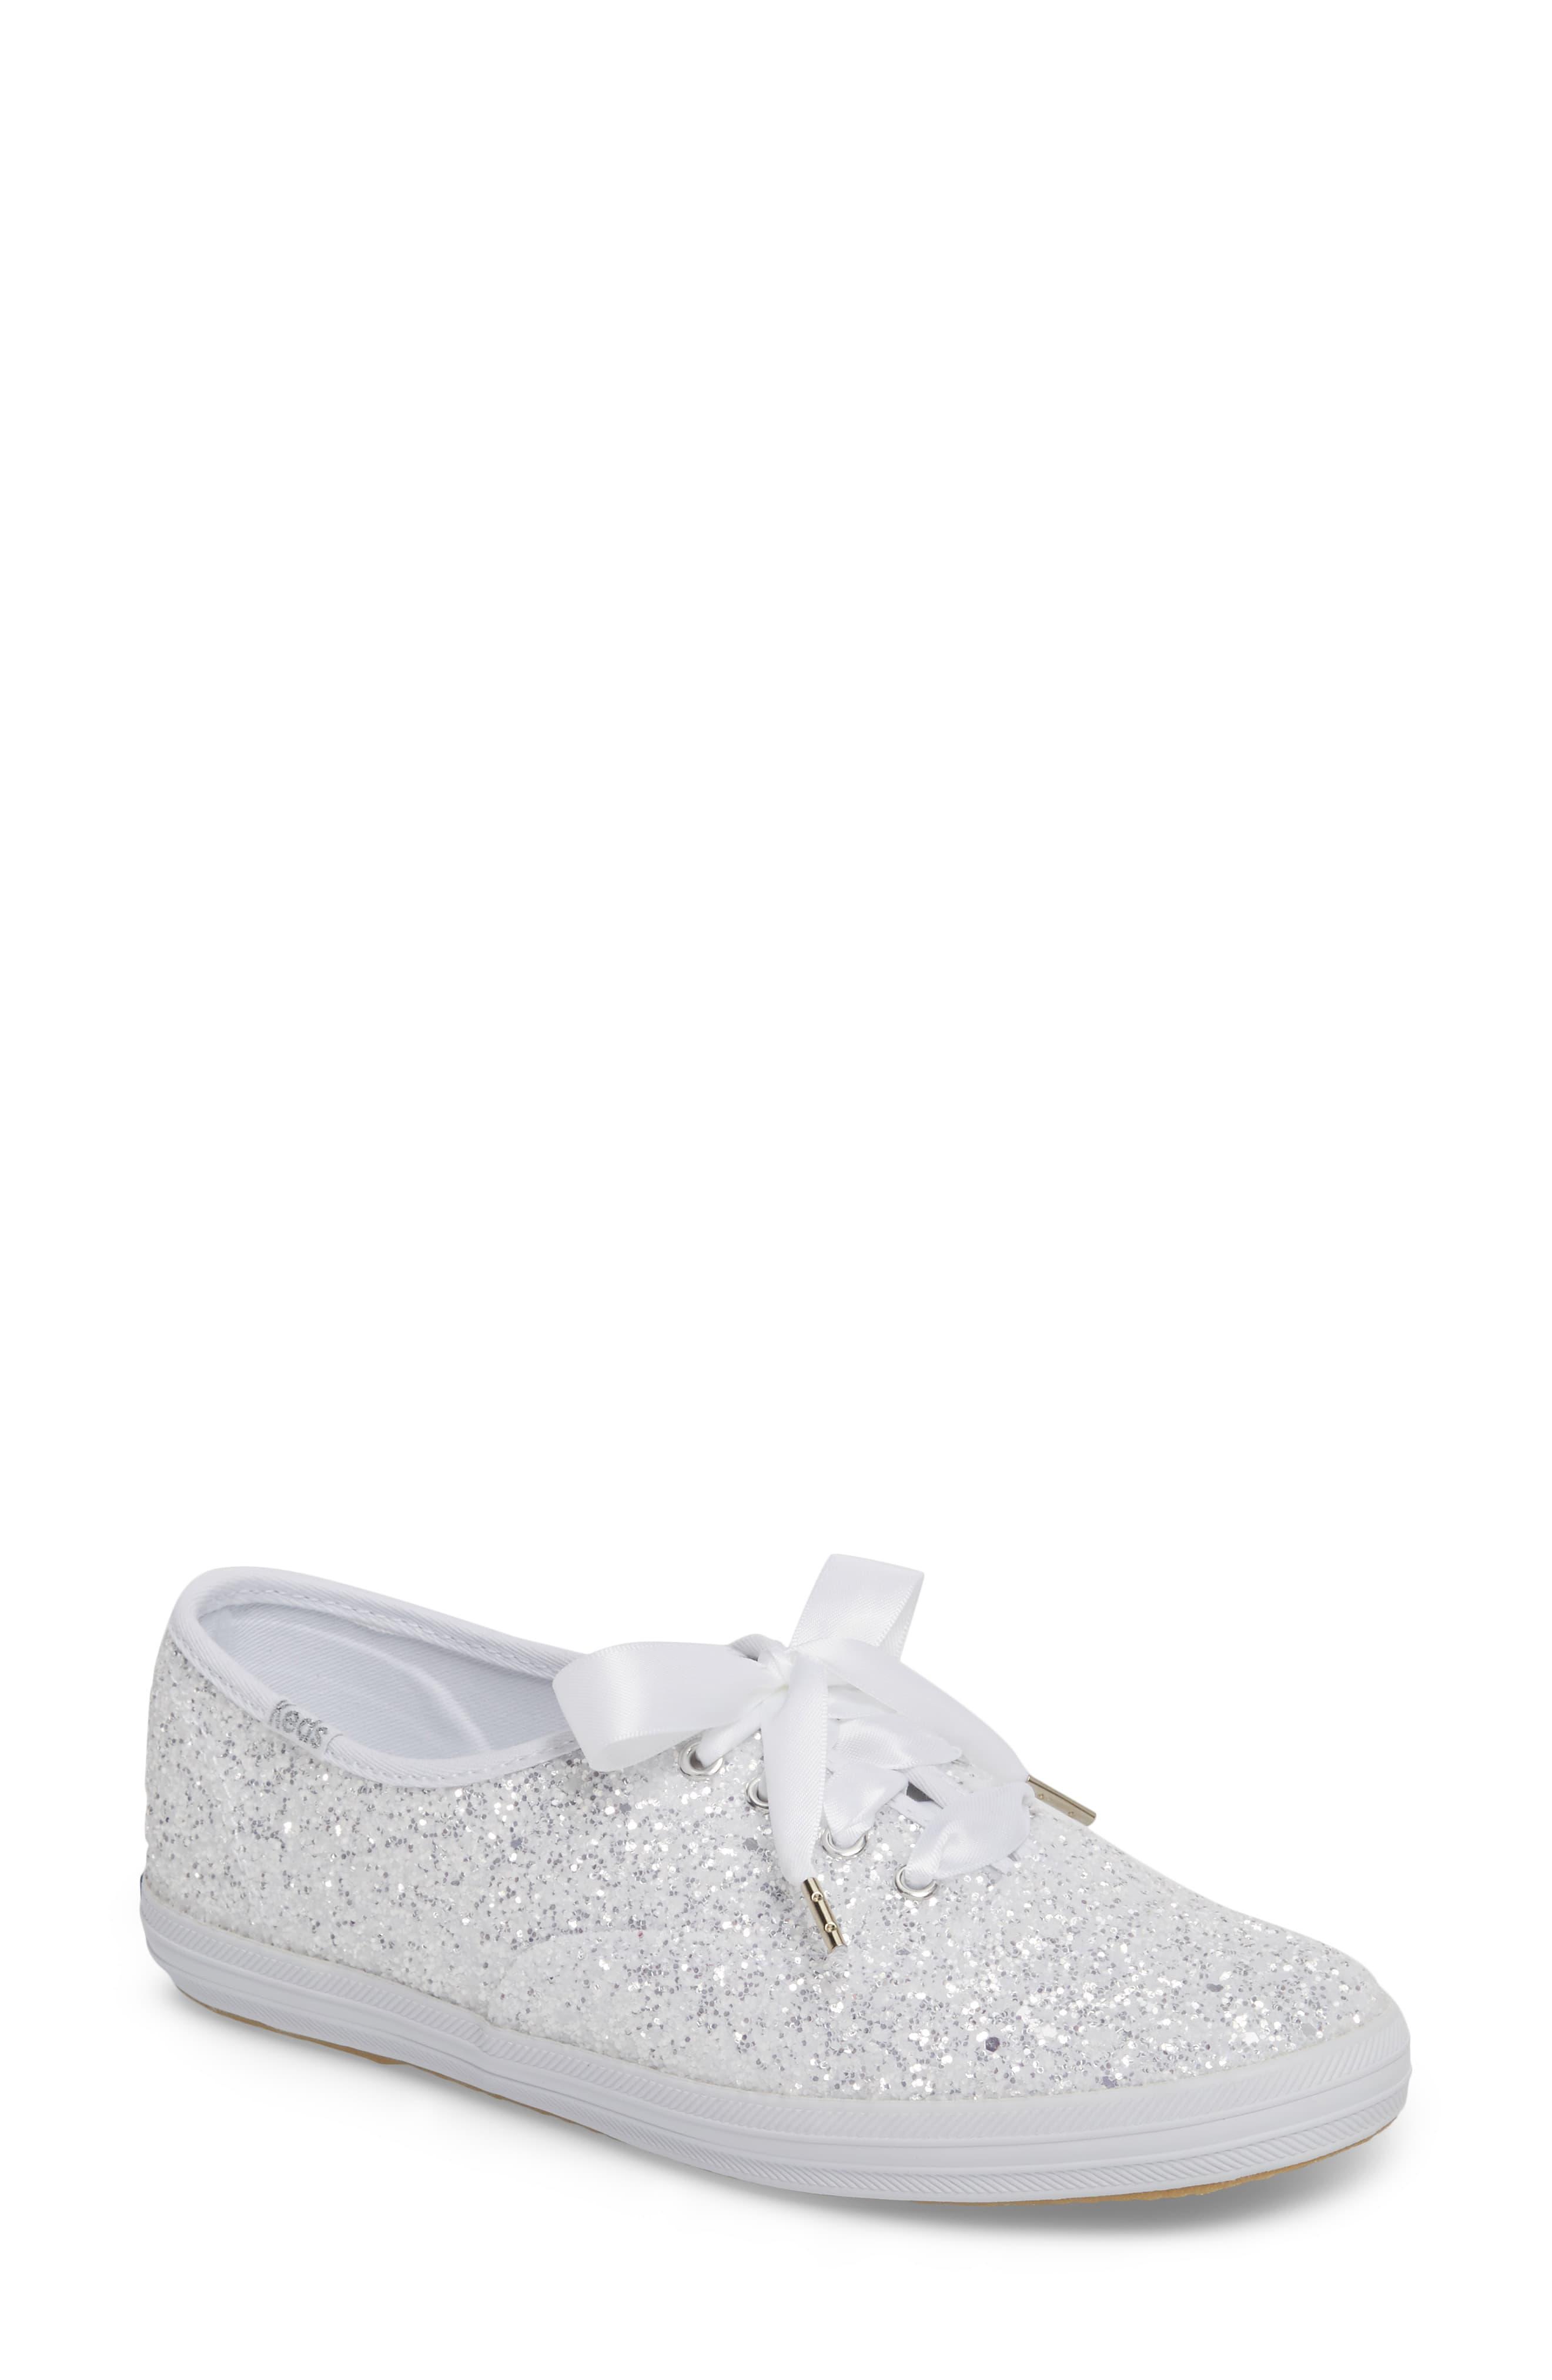 Kate Spade Canvas Keds X New York Champion Glitter Sneakers in White - Lyst